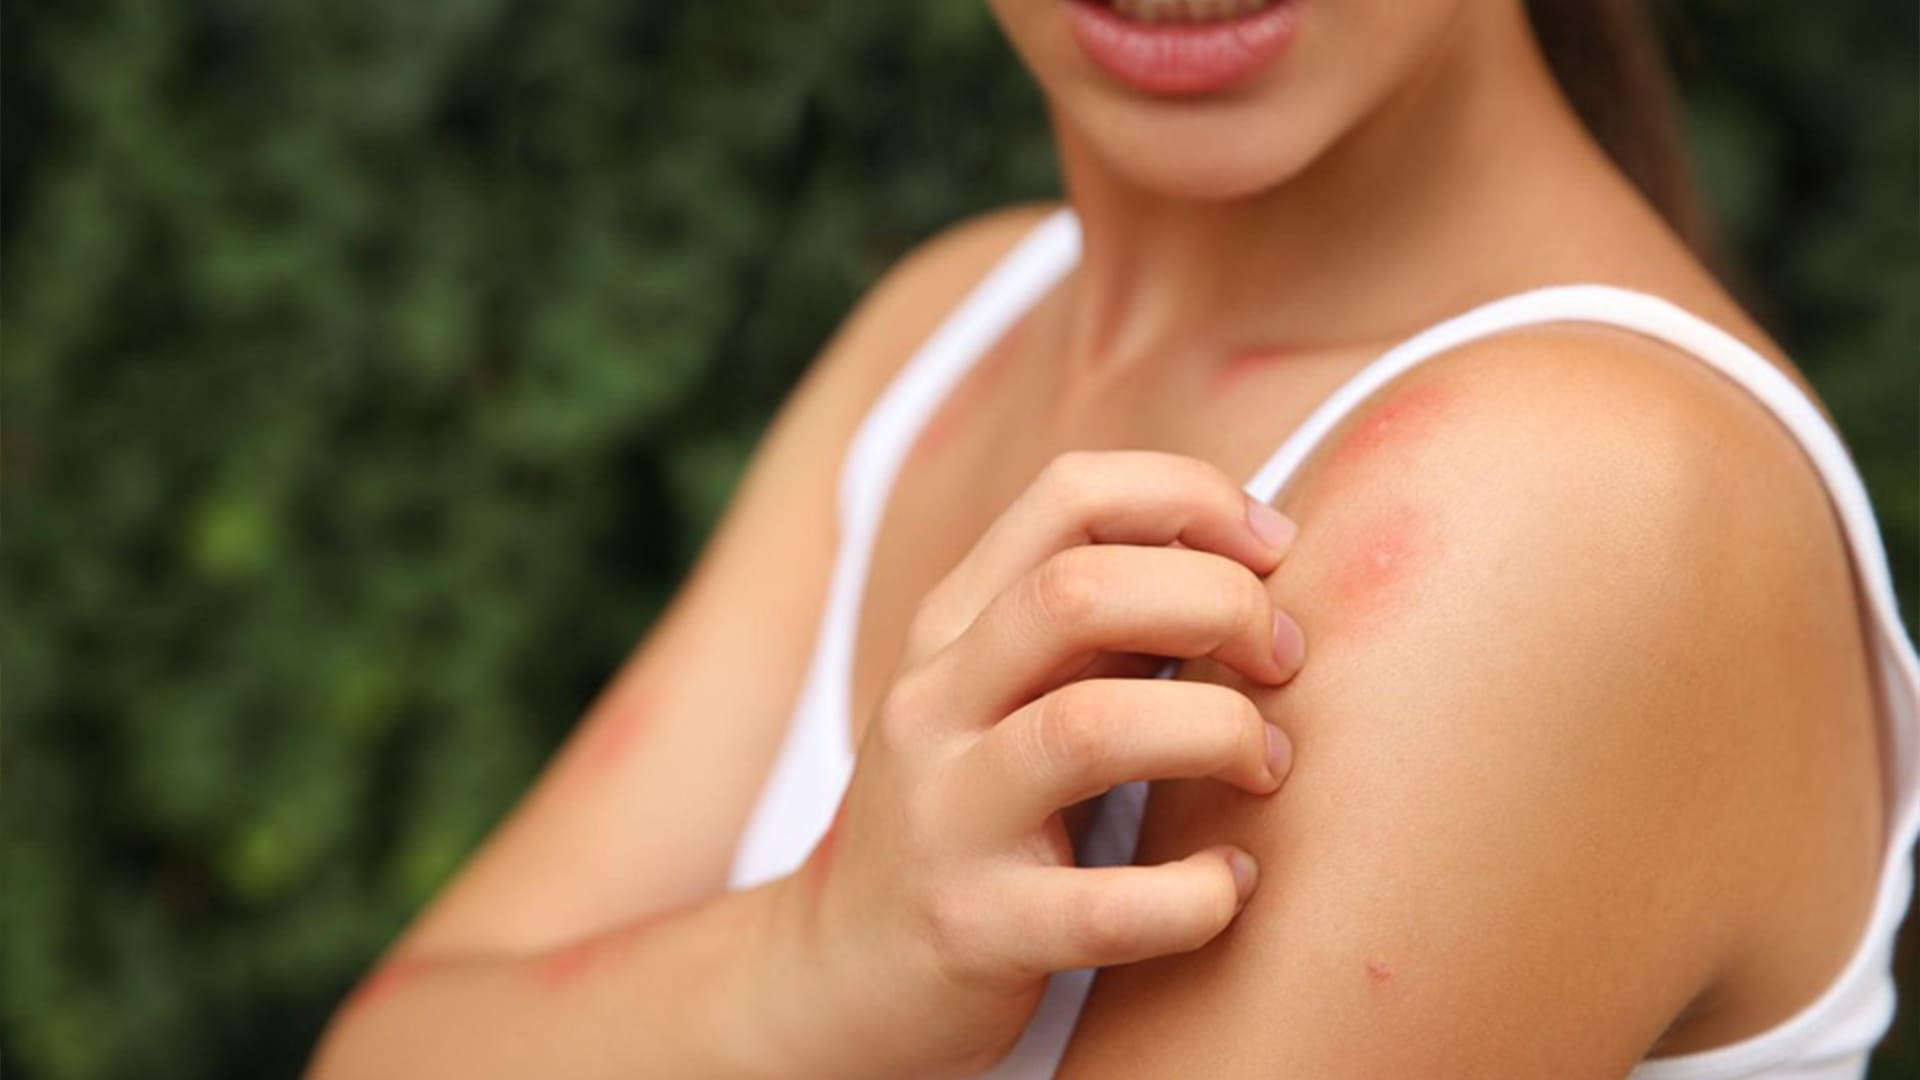 6 Home Remedies For Itchy Mosquito Bites